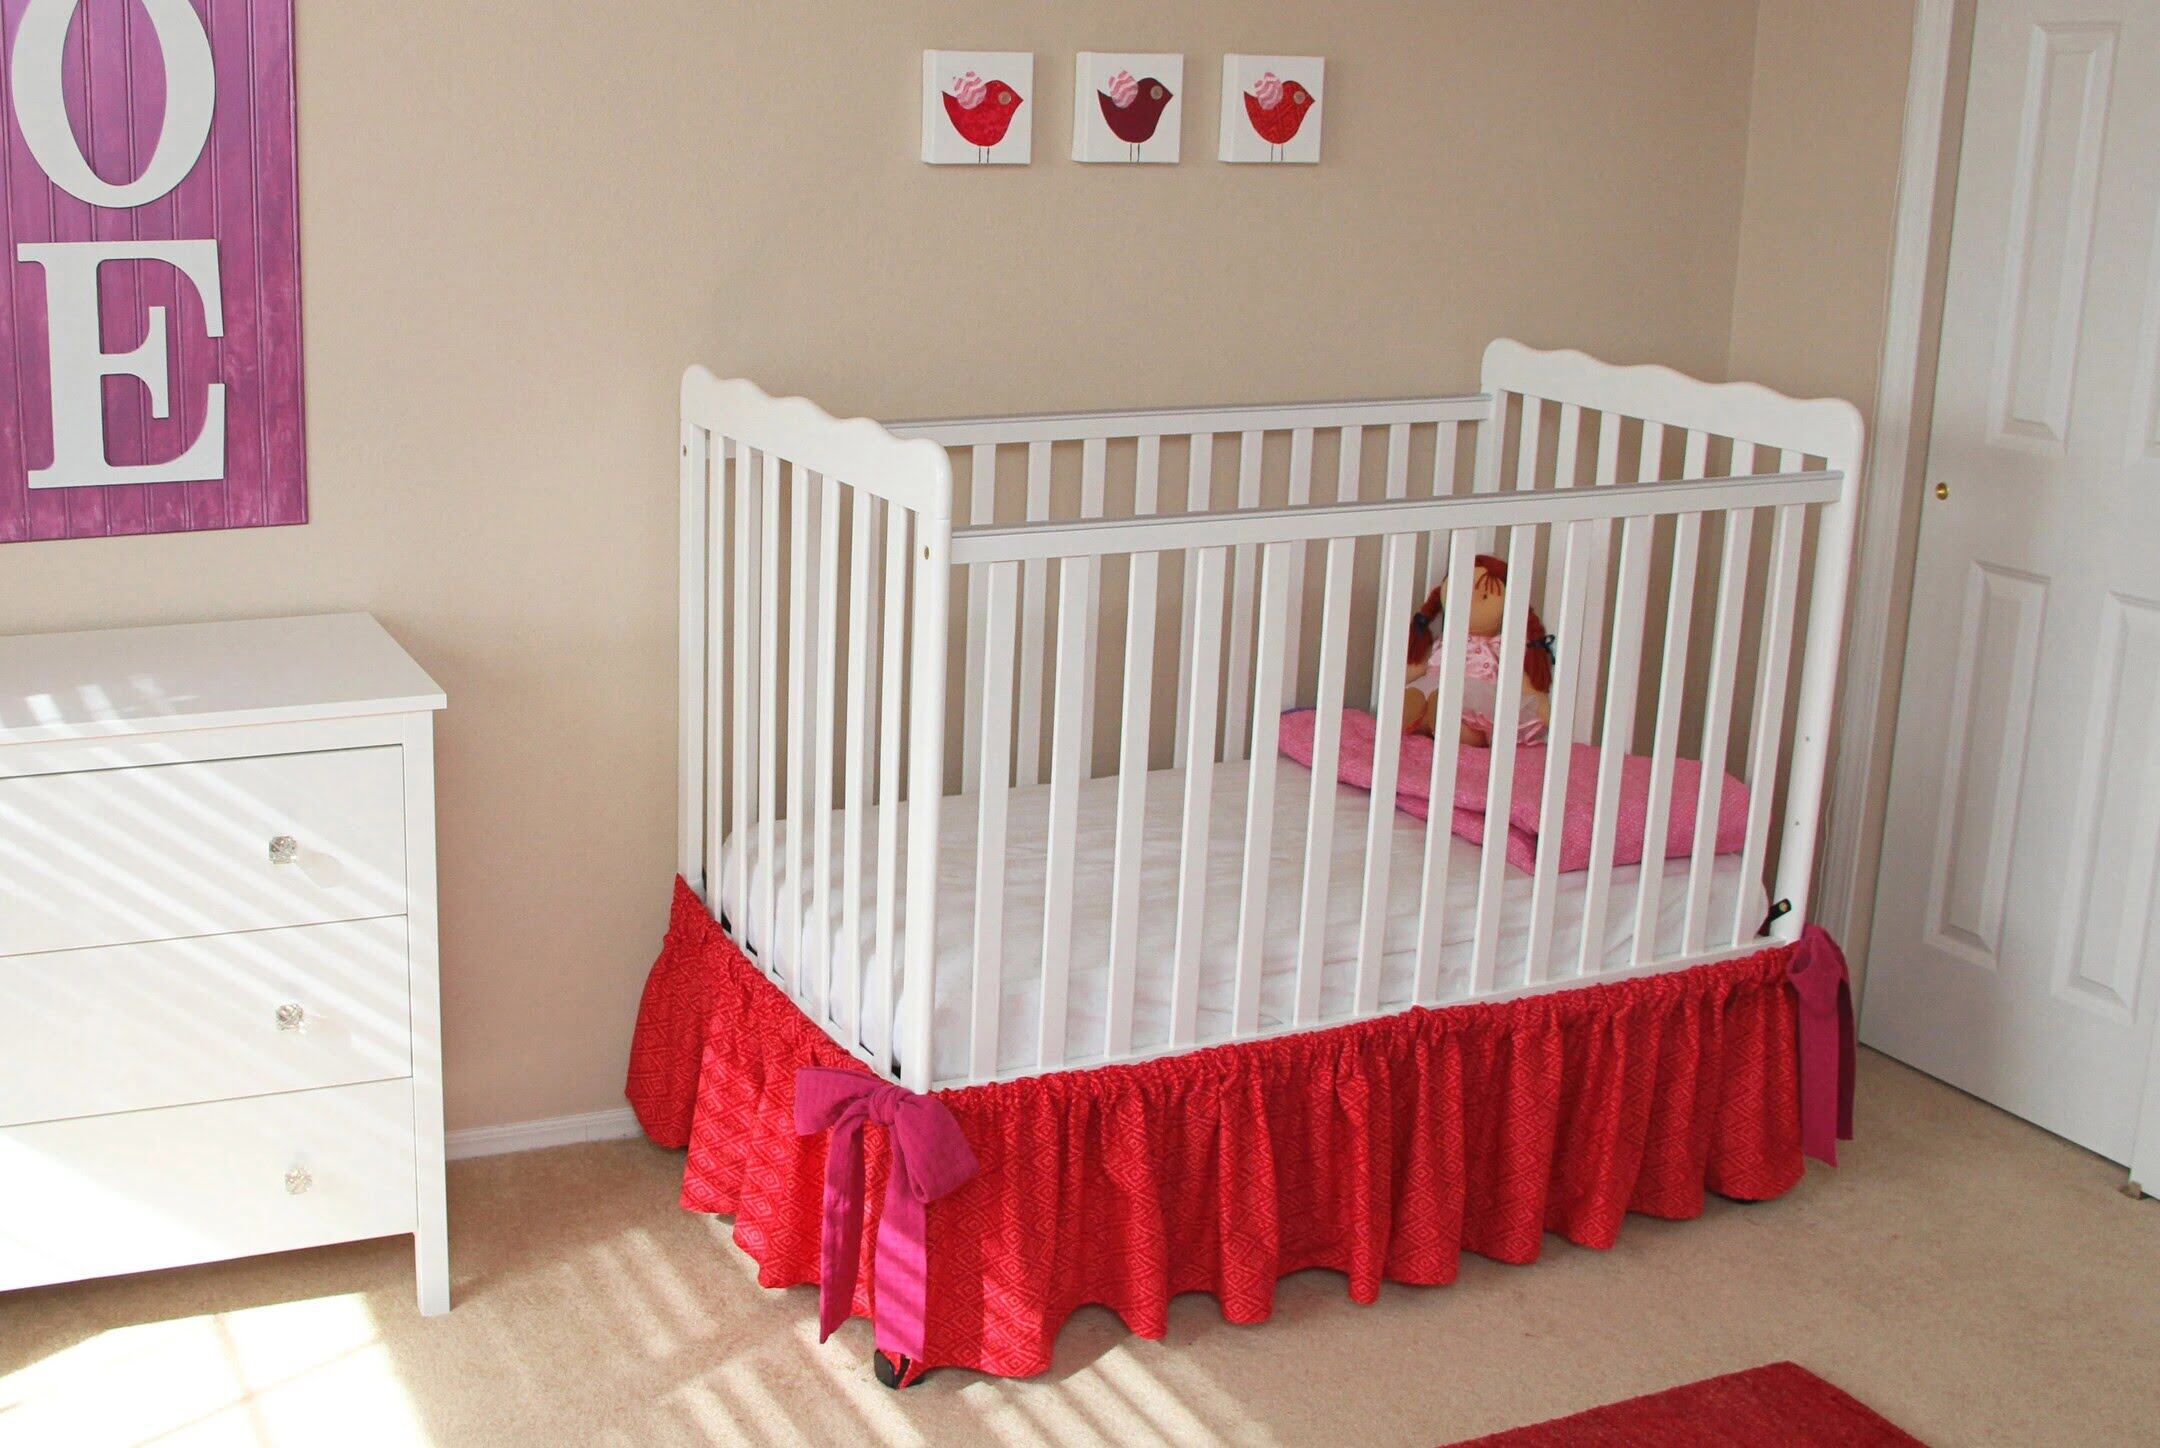 How To Make A Baby Crib Bed Skirt